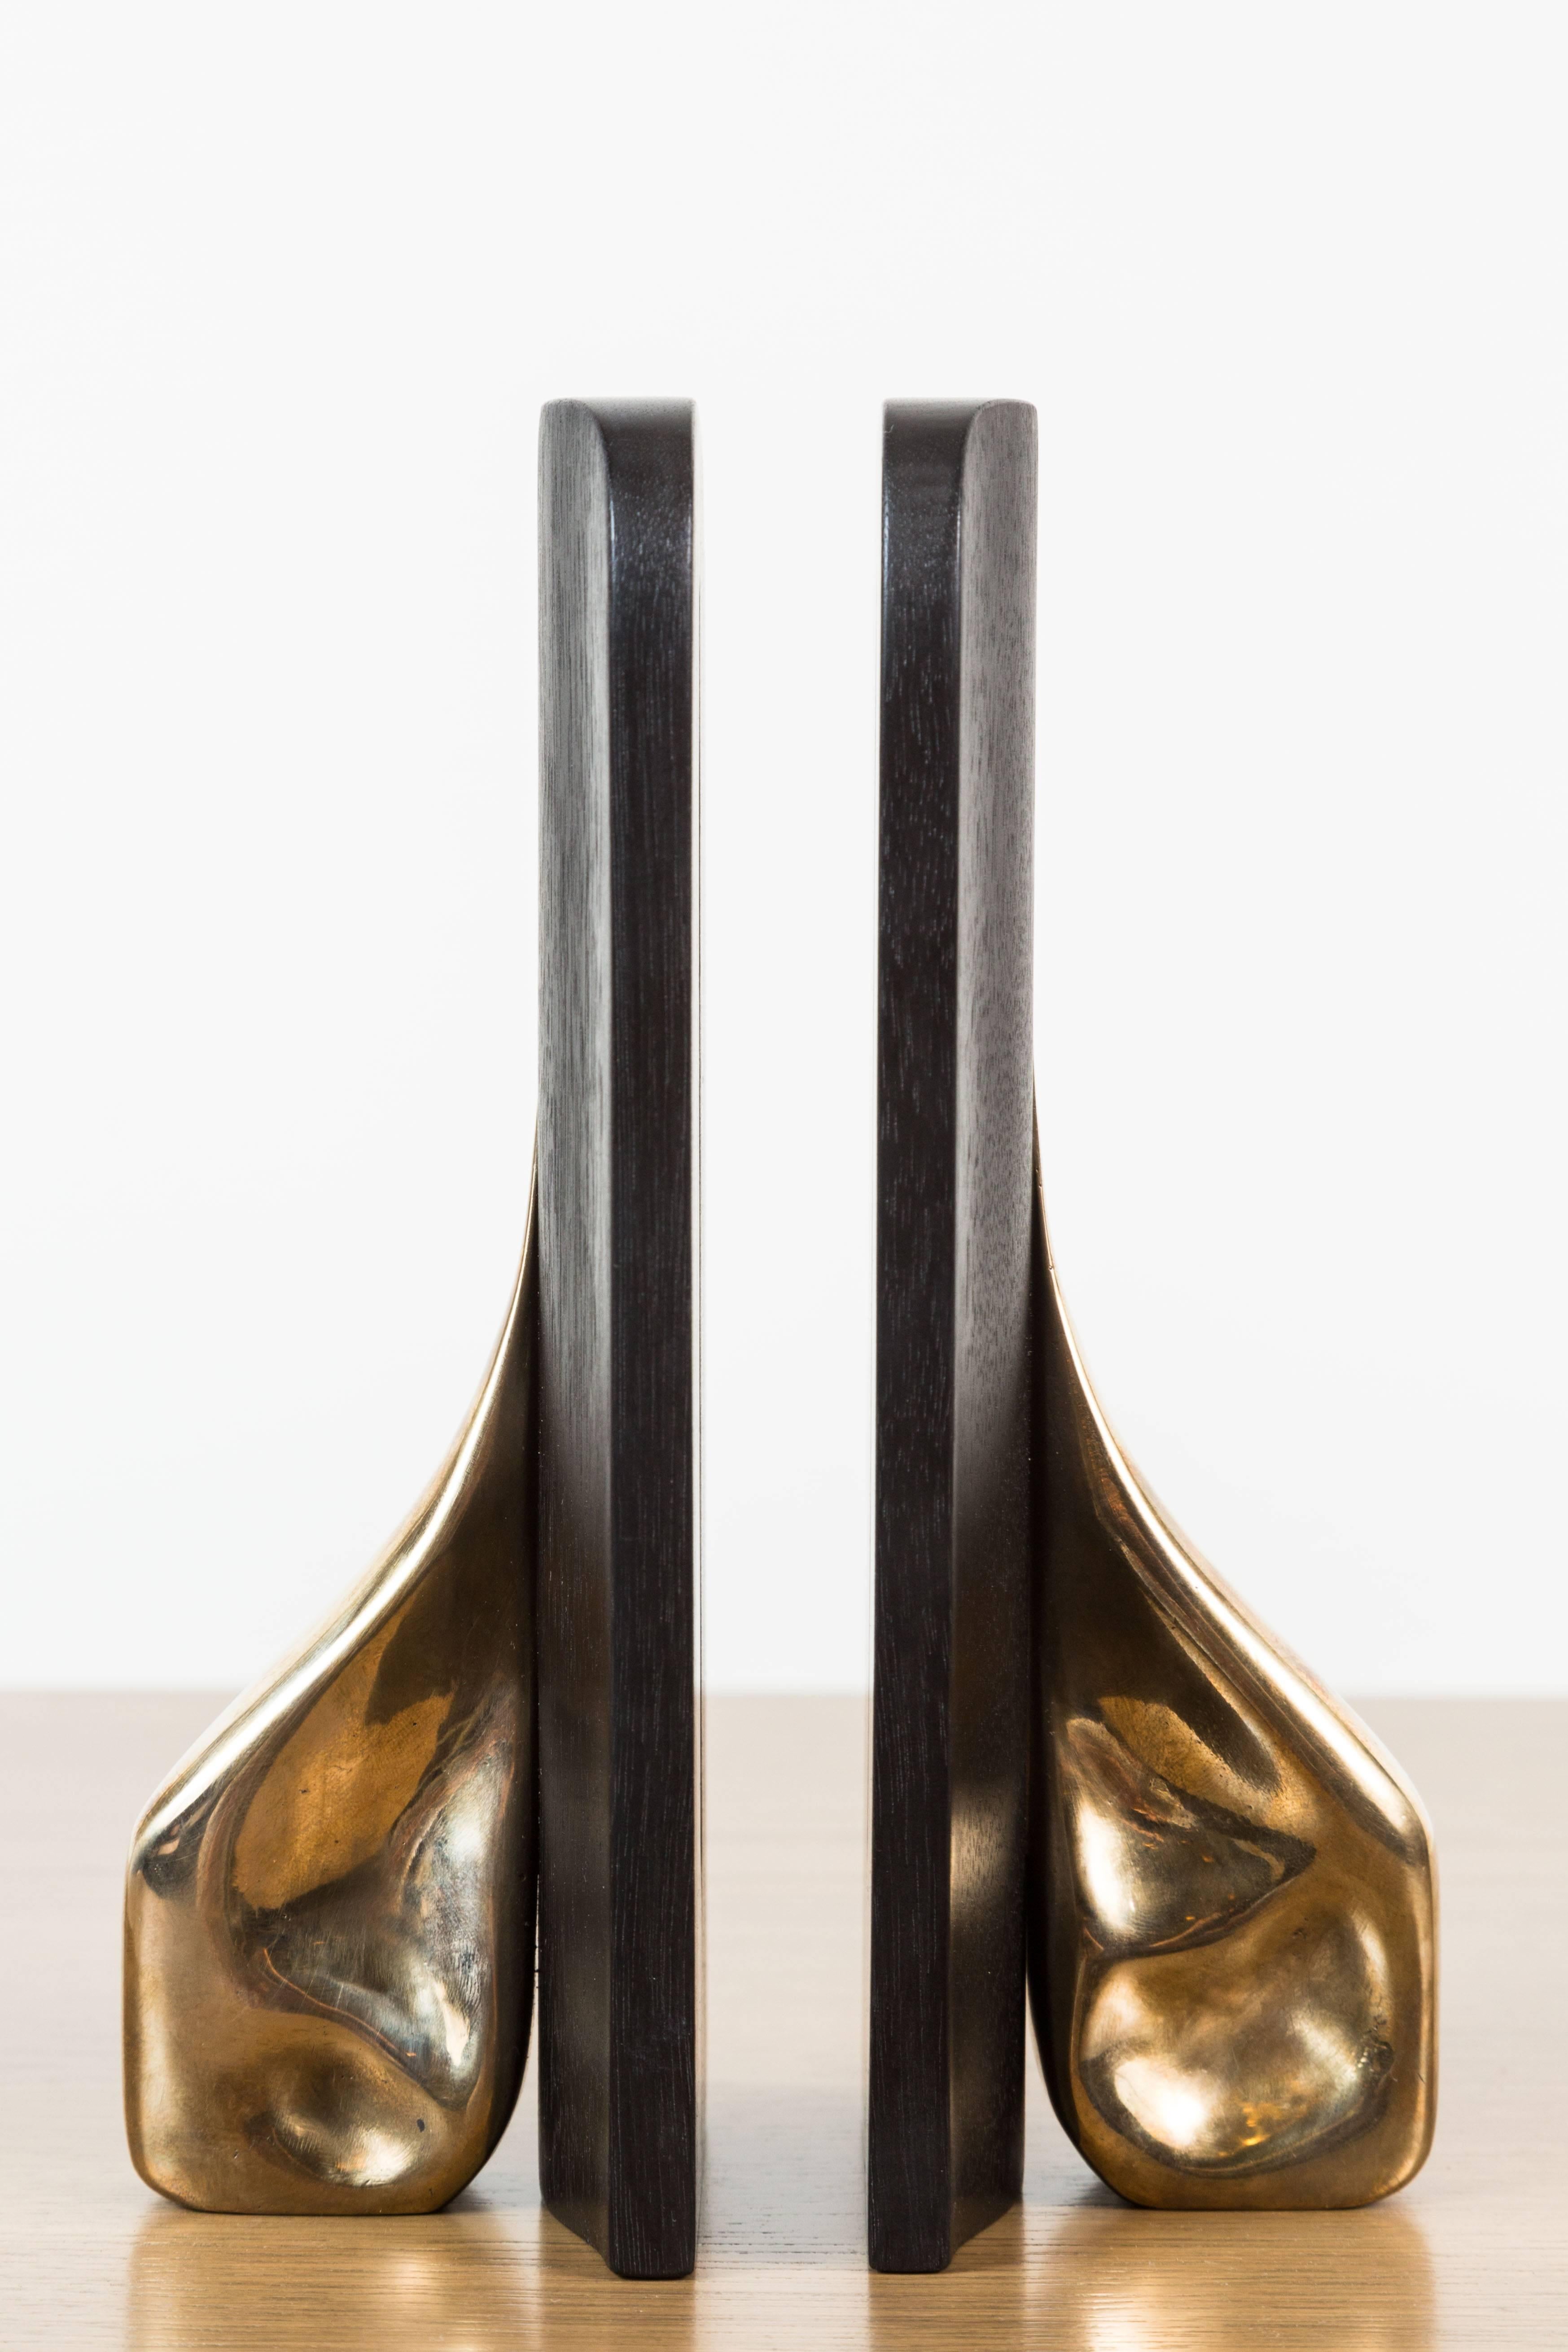 Pair of Ebonized Walnut and Cast Bronze Bookends by artist Vincent Pocsik in collaboration with Lawson-Fenning. Made of natural materials, this decorative object can be accessorized on table top, book shelf, or desk to achieve an organic modern